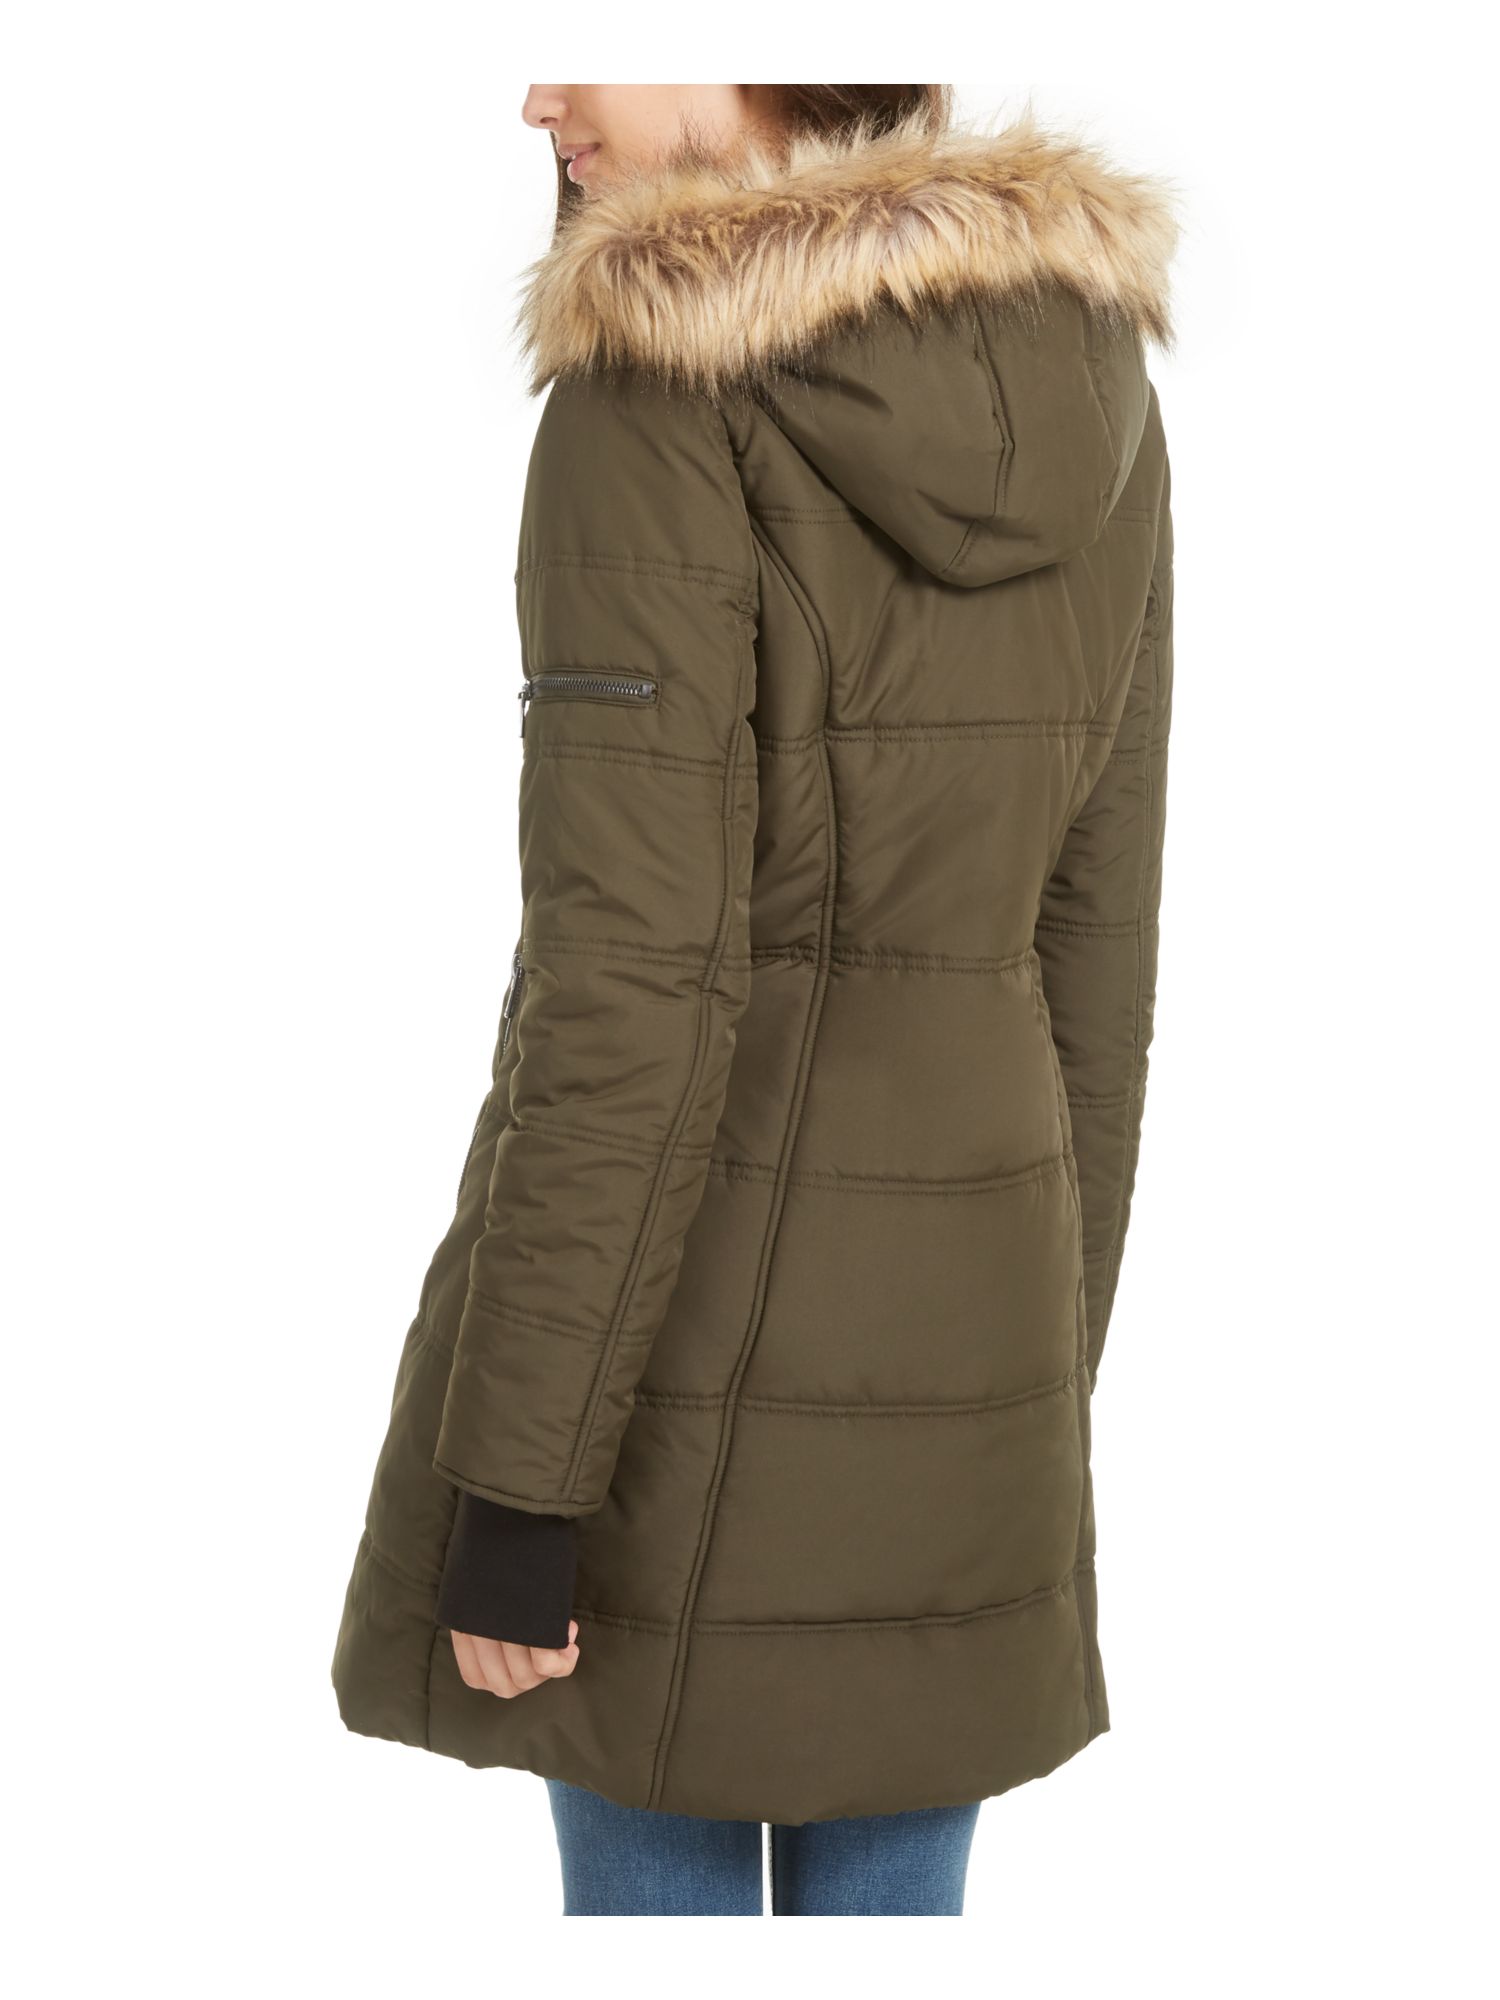 MARALYN & ME Womens Green Faux Fur Pocketed Hooded Puffer Winter Jacket Coat Juniors M - image 2 of 2